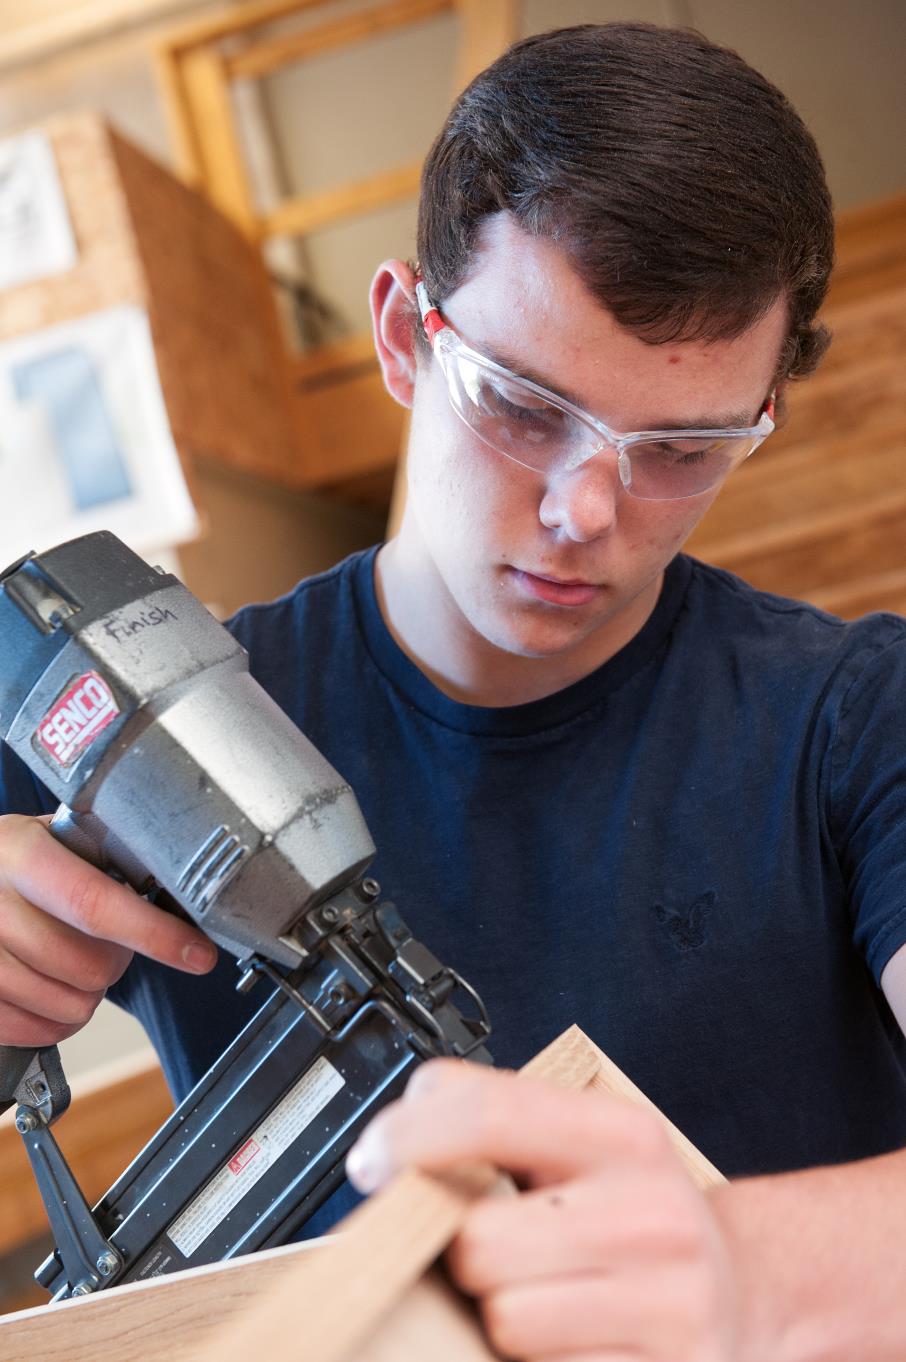 Male construction student uses a drill on a piece of wood